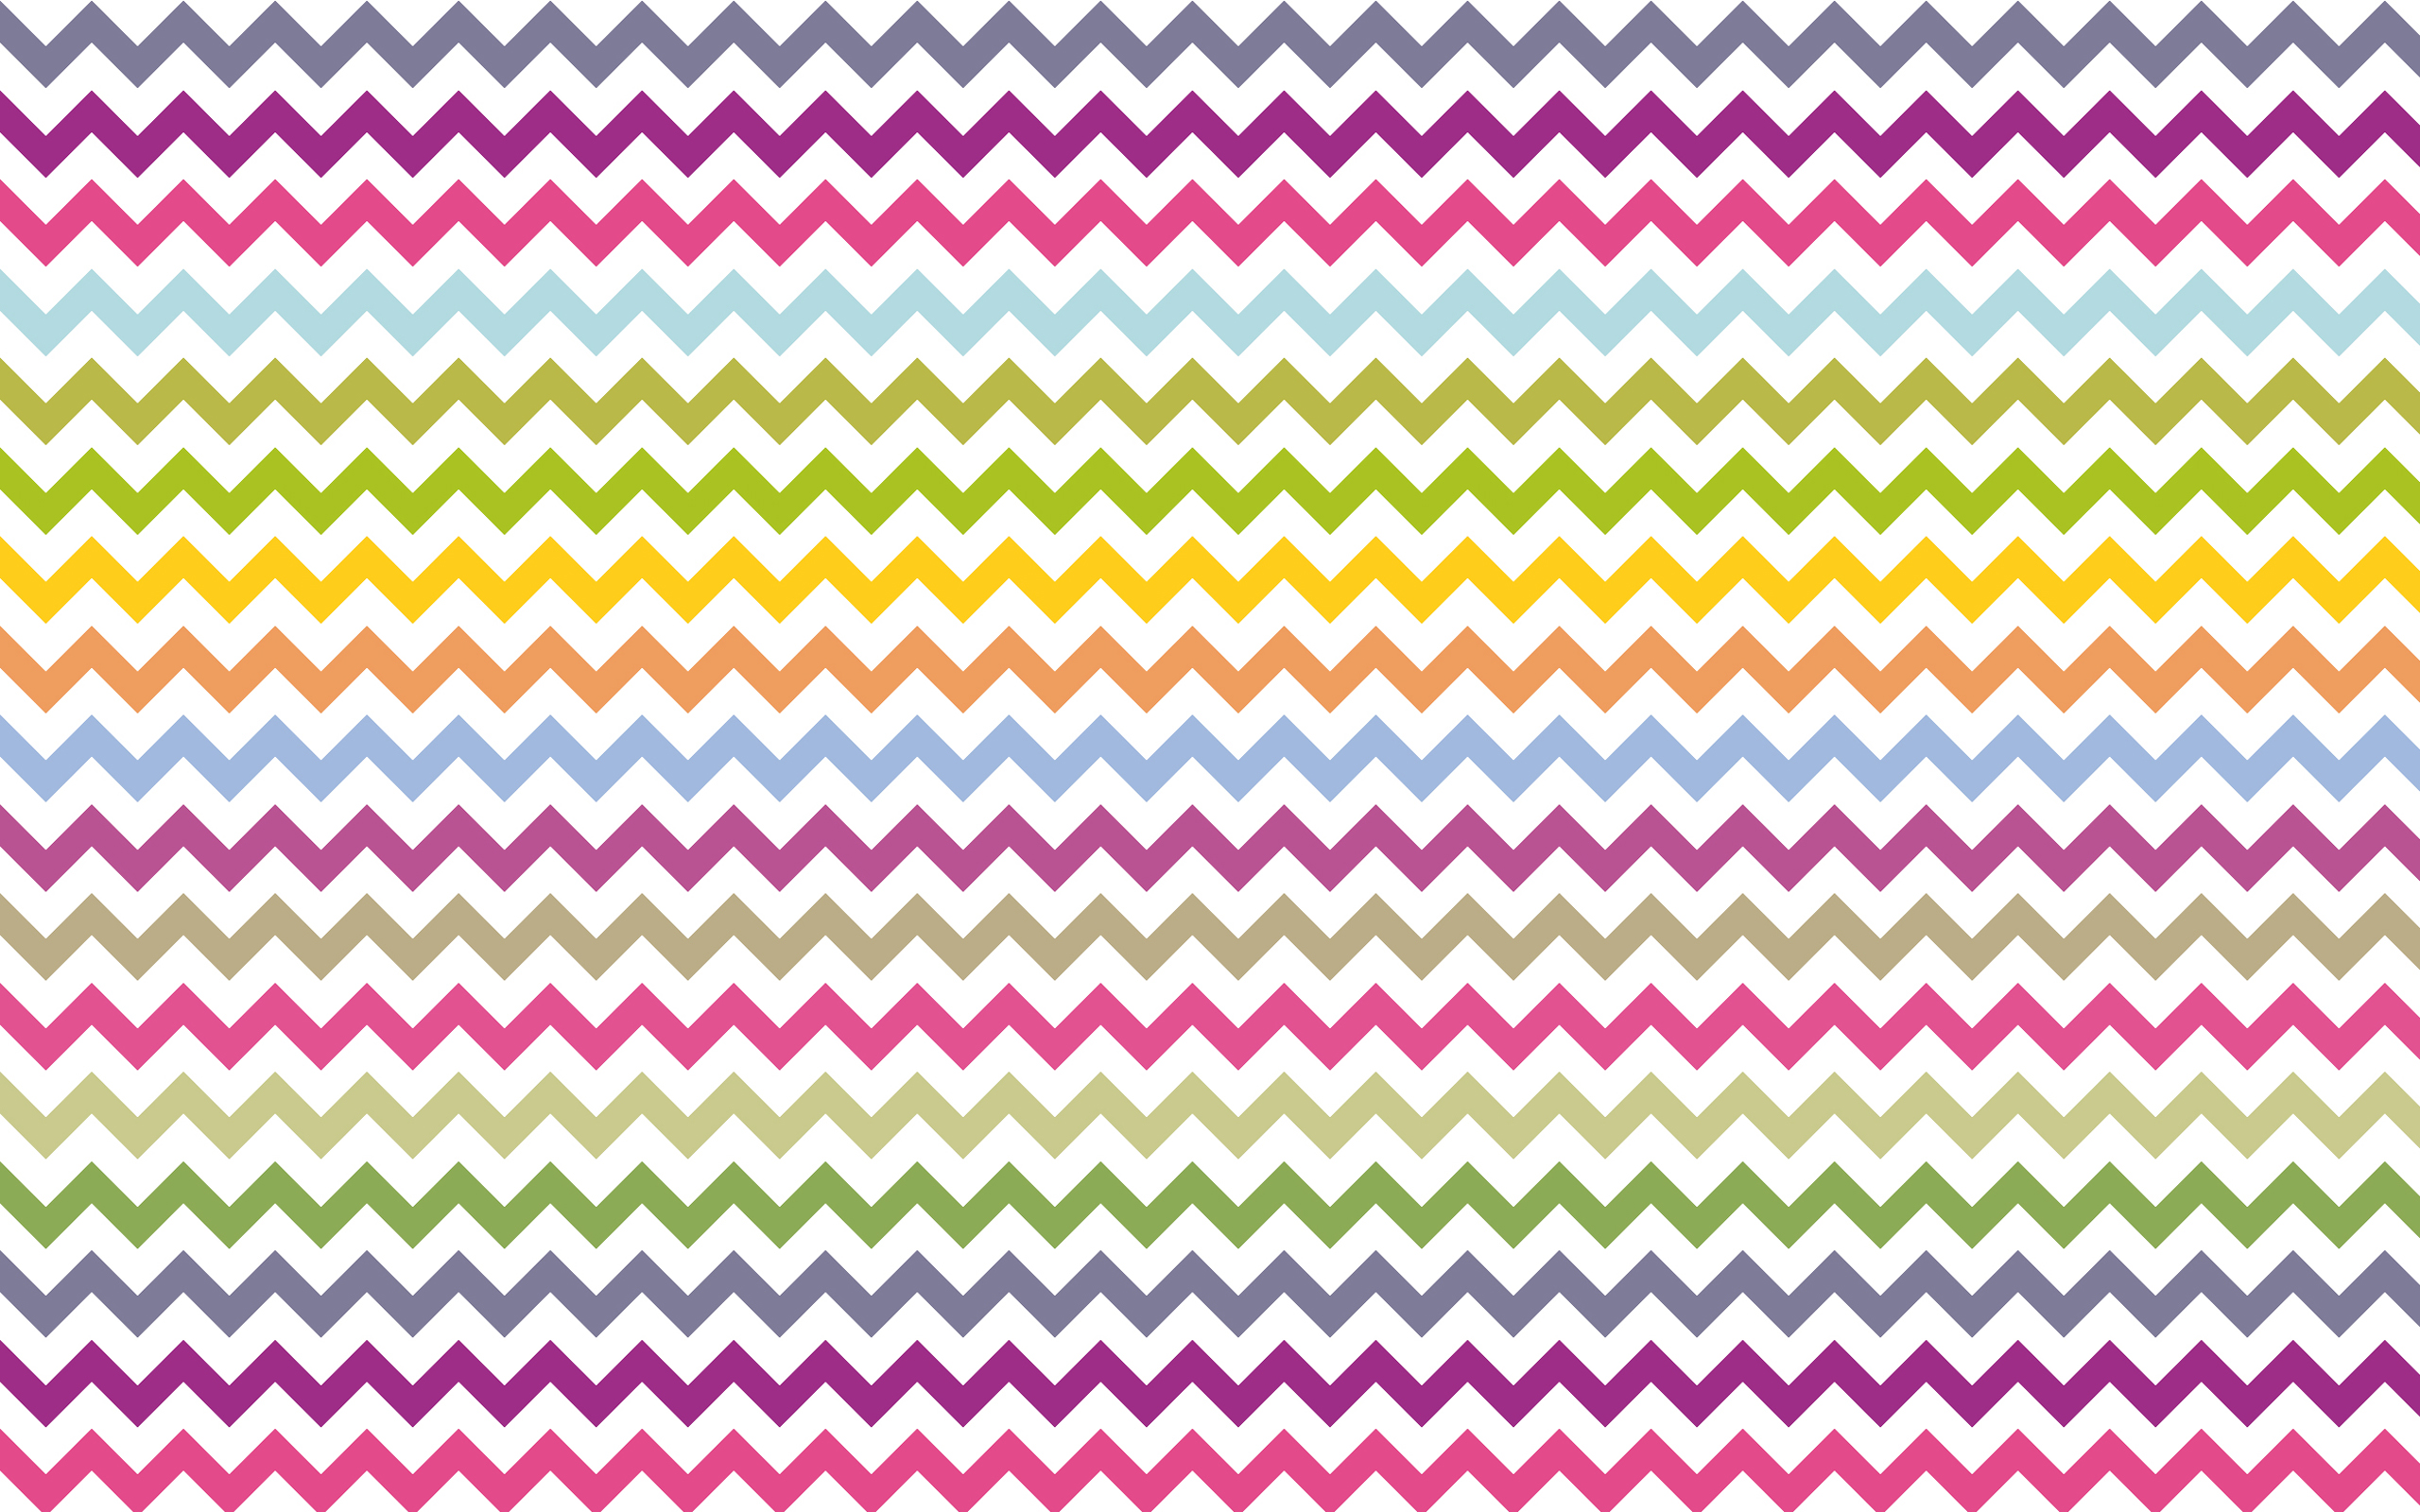 My Colorful Chevron Desktop Wallpaper   Another House Blog